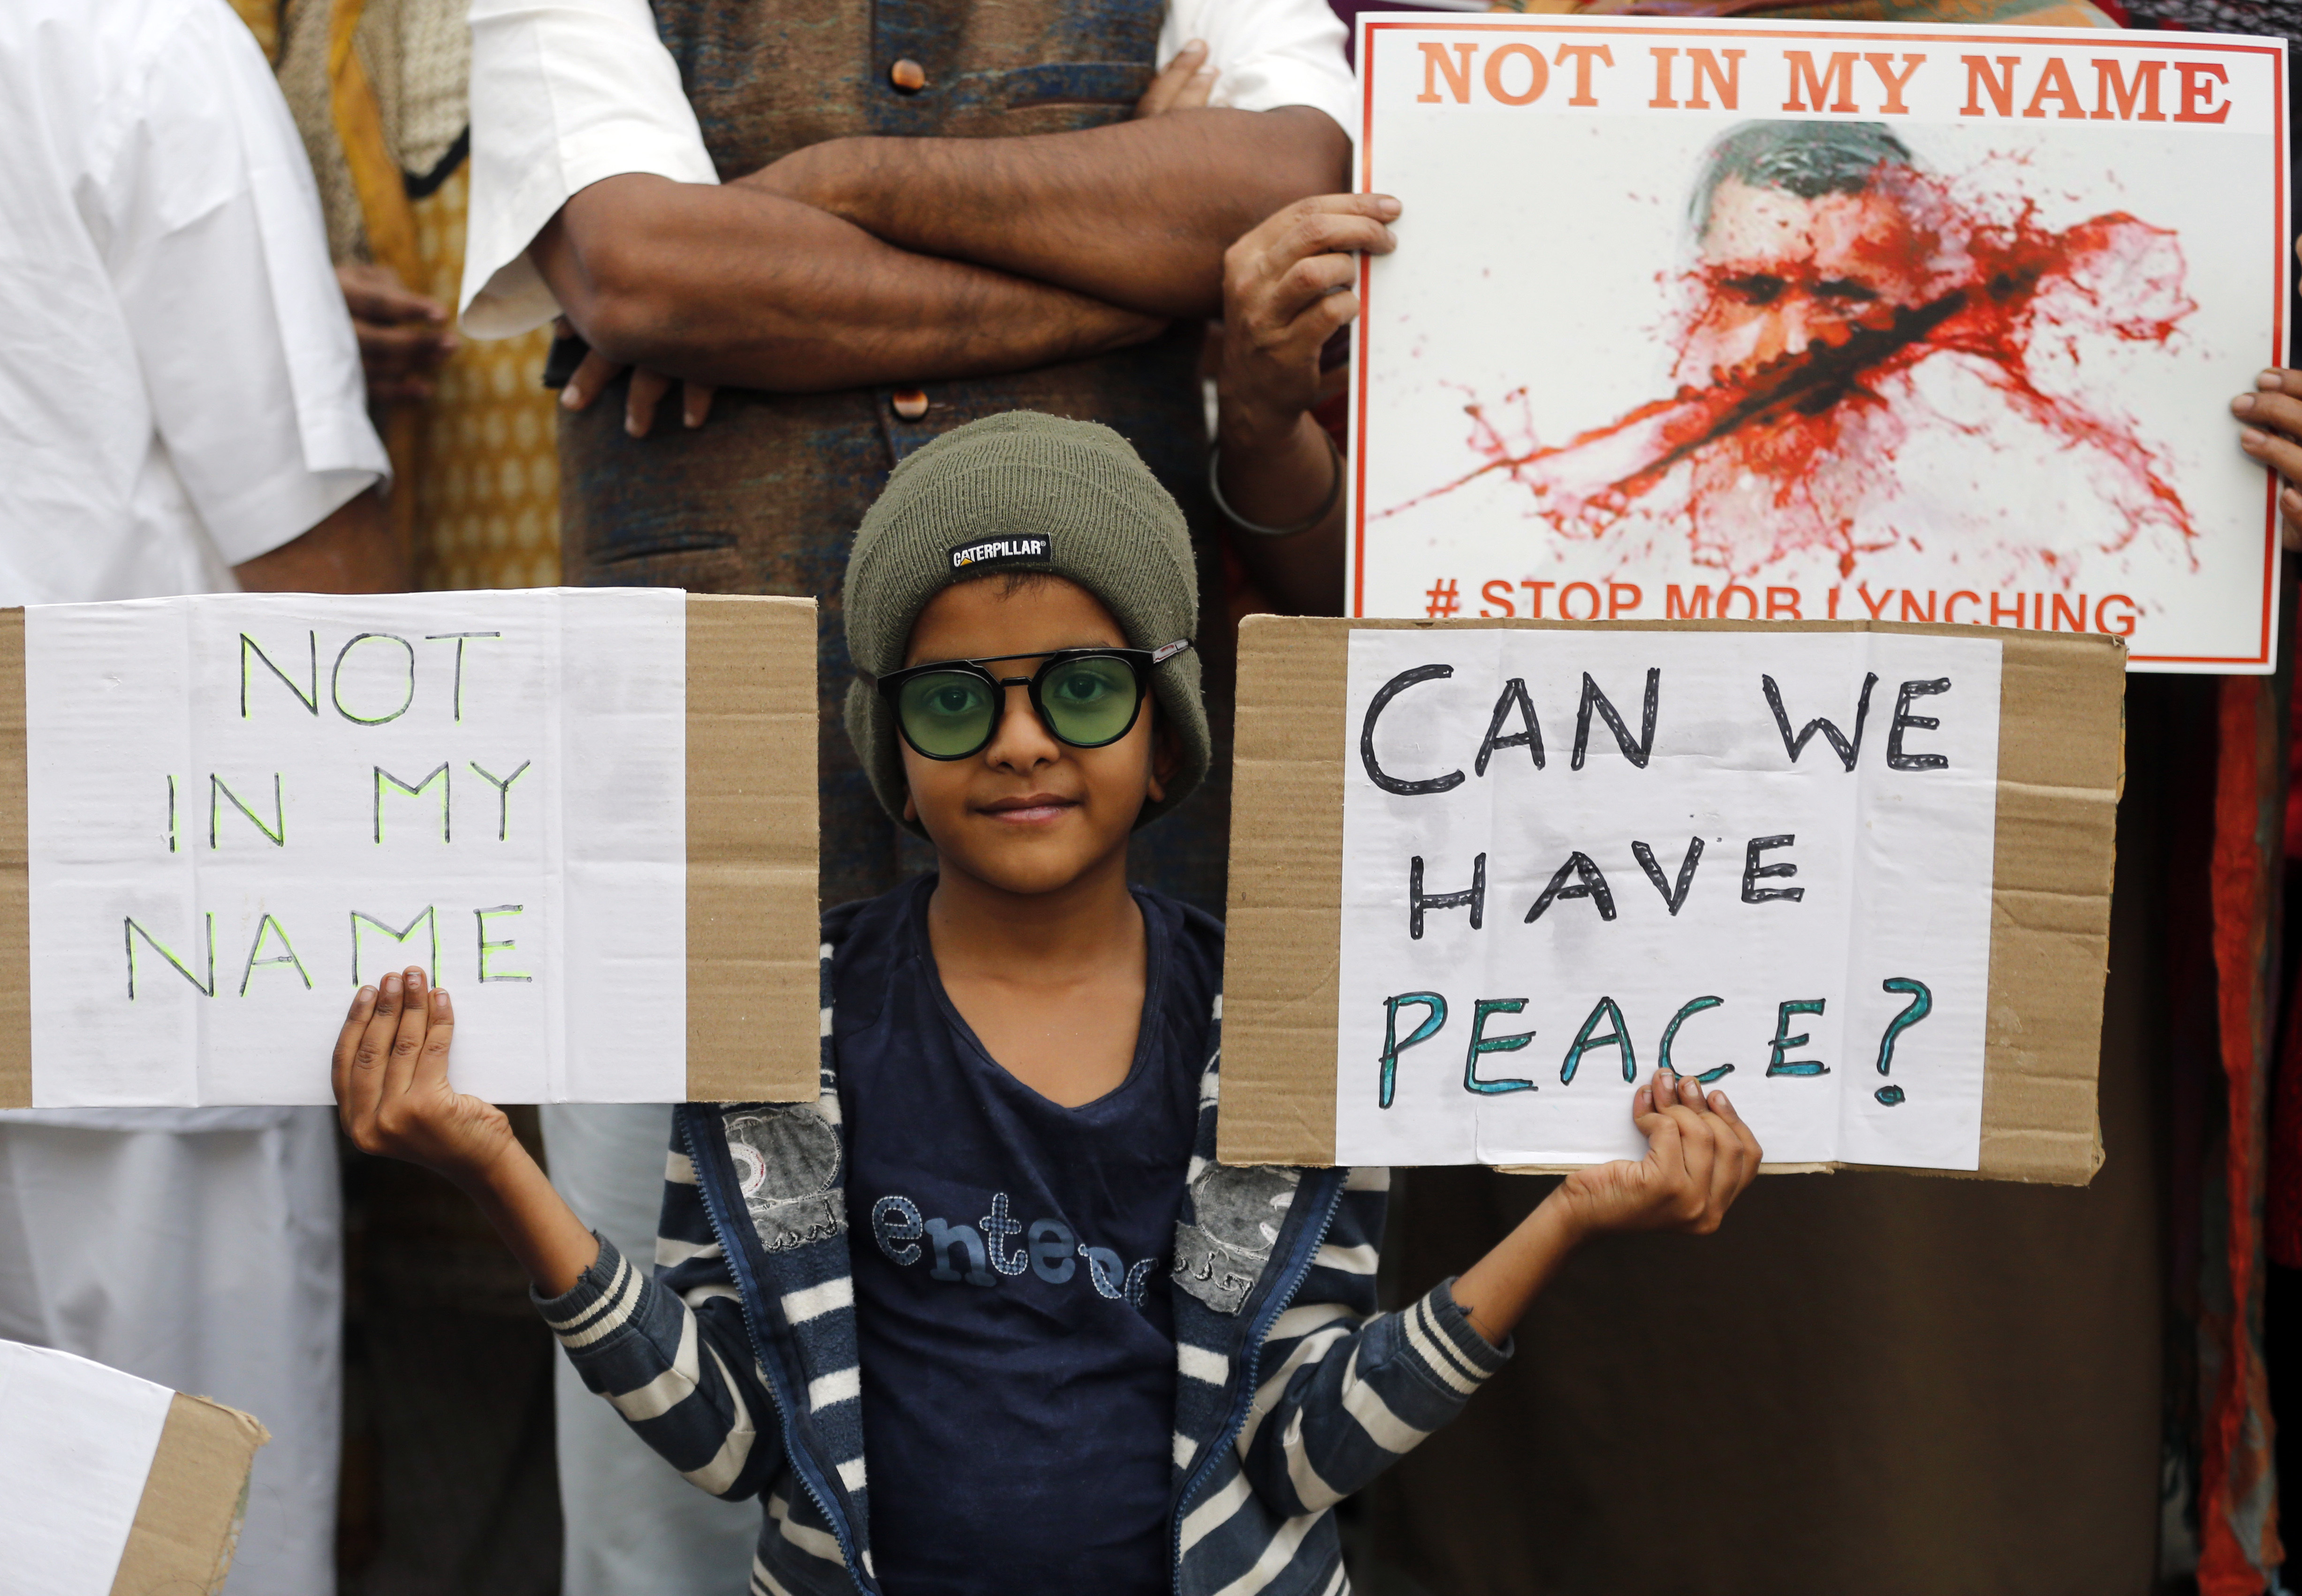 A boy holds placards during a protest against a spate of violent attacks across the country targeting the country's Muslim minority, in Bangalore, India, Wednesday, June 28, 2017. Thousands of protestors gathered in different cities to decry the silence of India's Hindu right-wing government in the face of the public lynchings and violent attacks on at least a dozen Muslim men and boys since it was voted to power in 2014. (AP Photo/Aijaz Rahi)